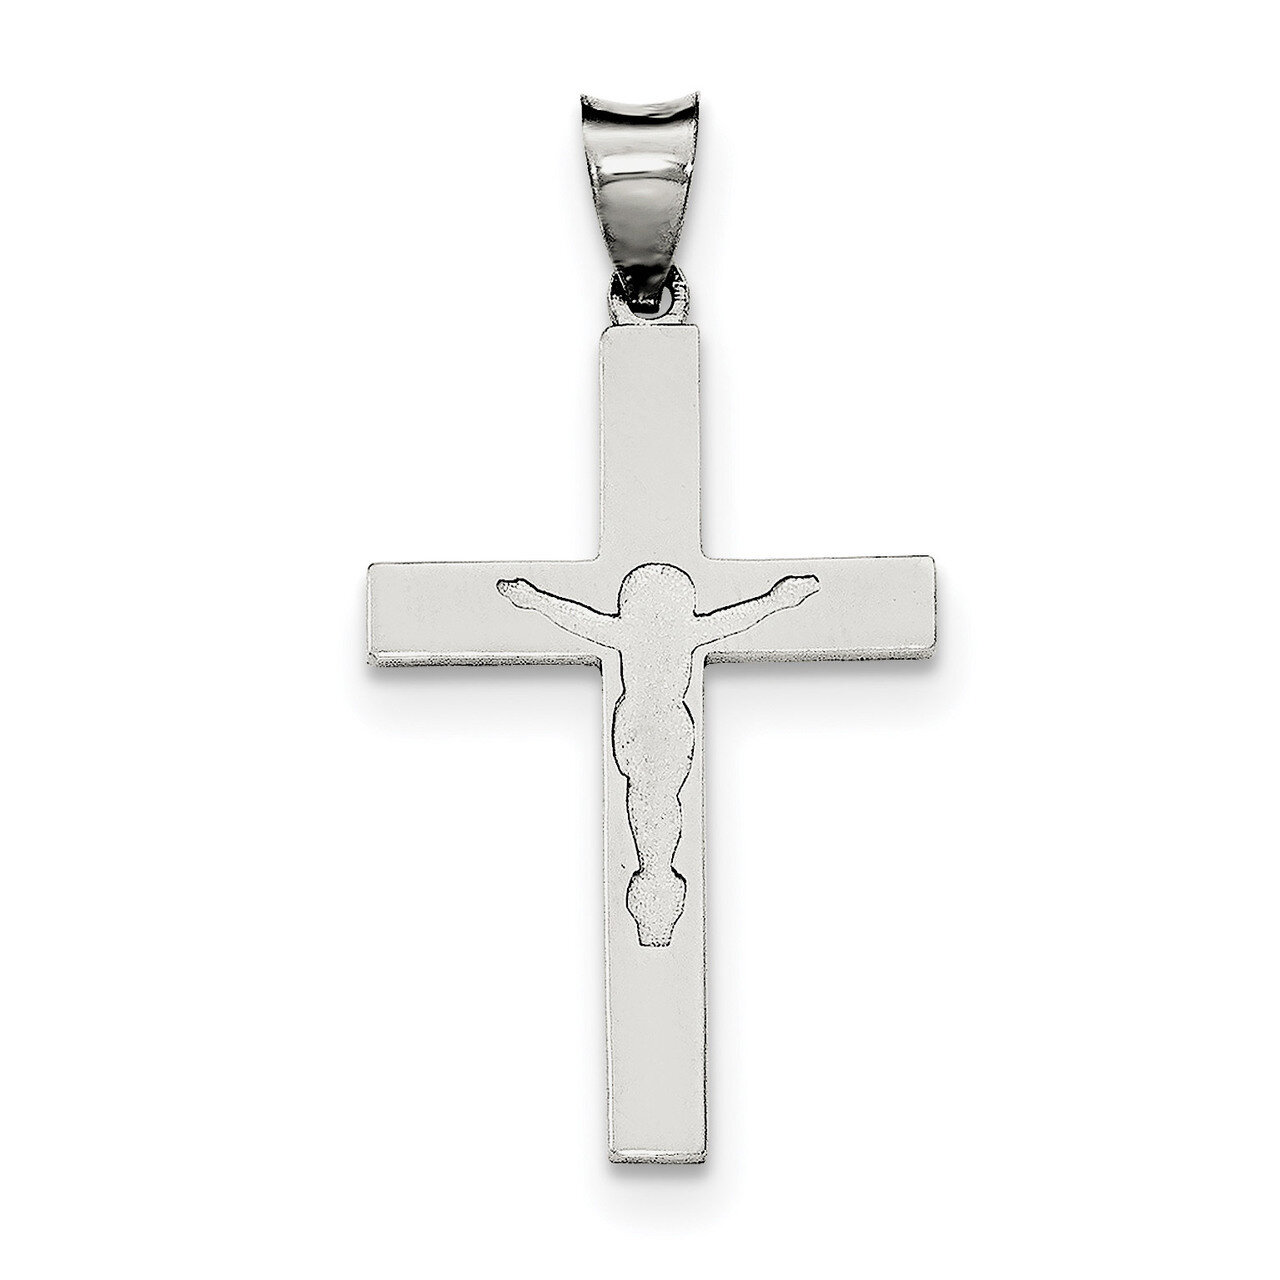 Textured Brushed and Polished Latin Cross Pendant Sterling Silver QC8285